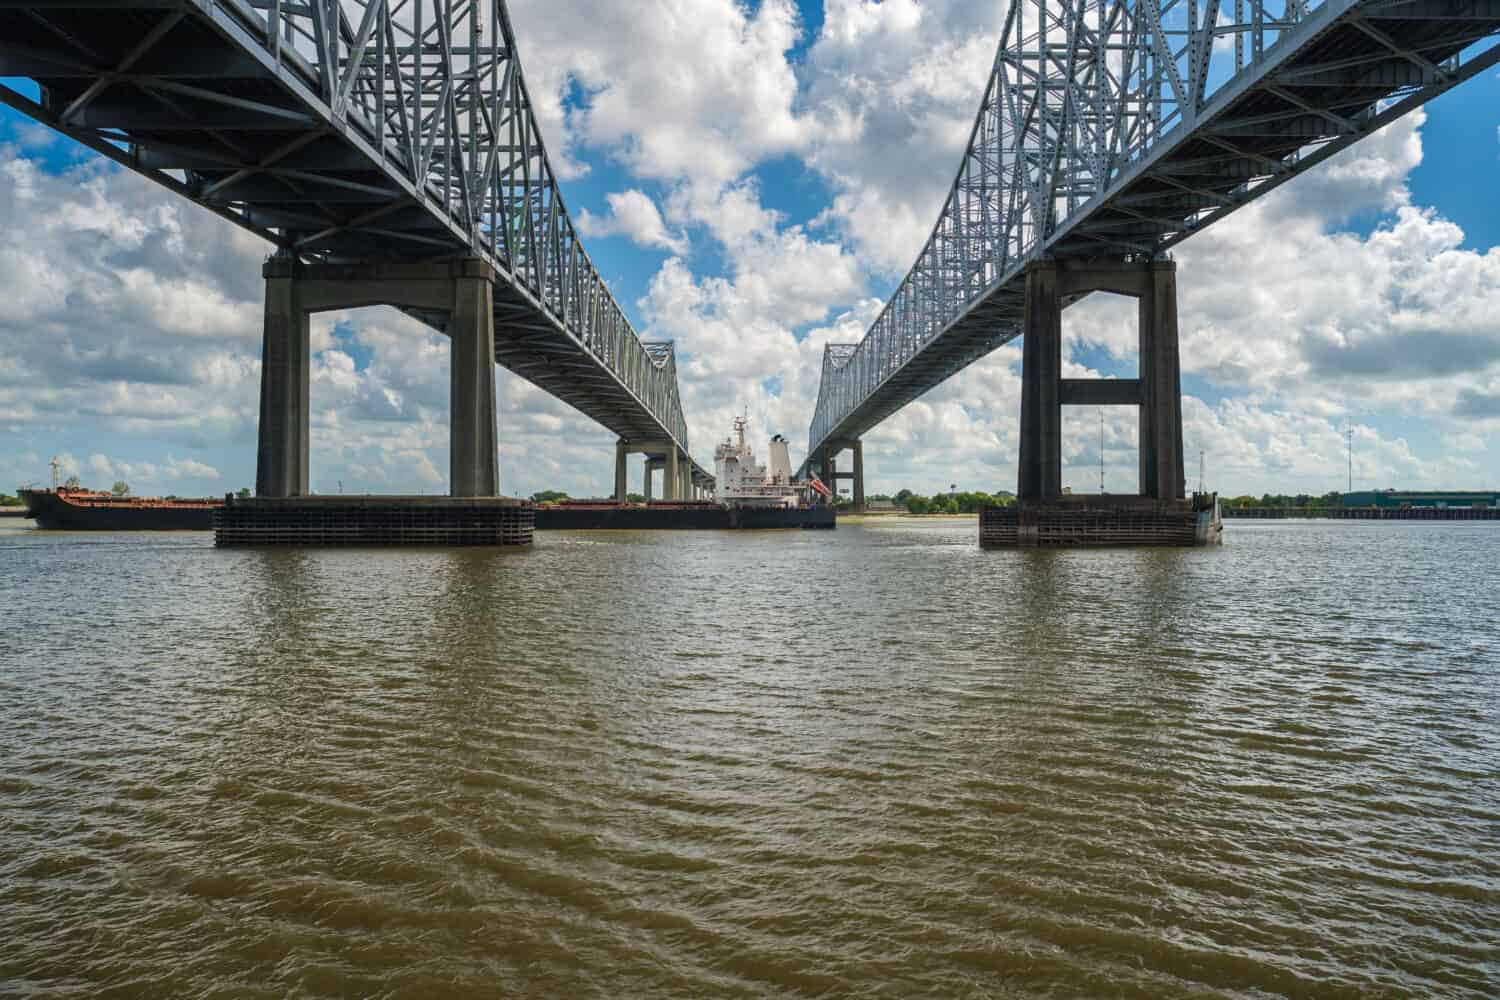 interstate 10 bridge over the Mississippi River in New Orleans, Louisiana with a cargo ship cruising by.